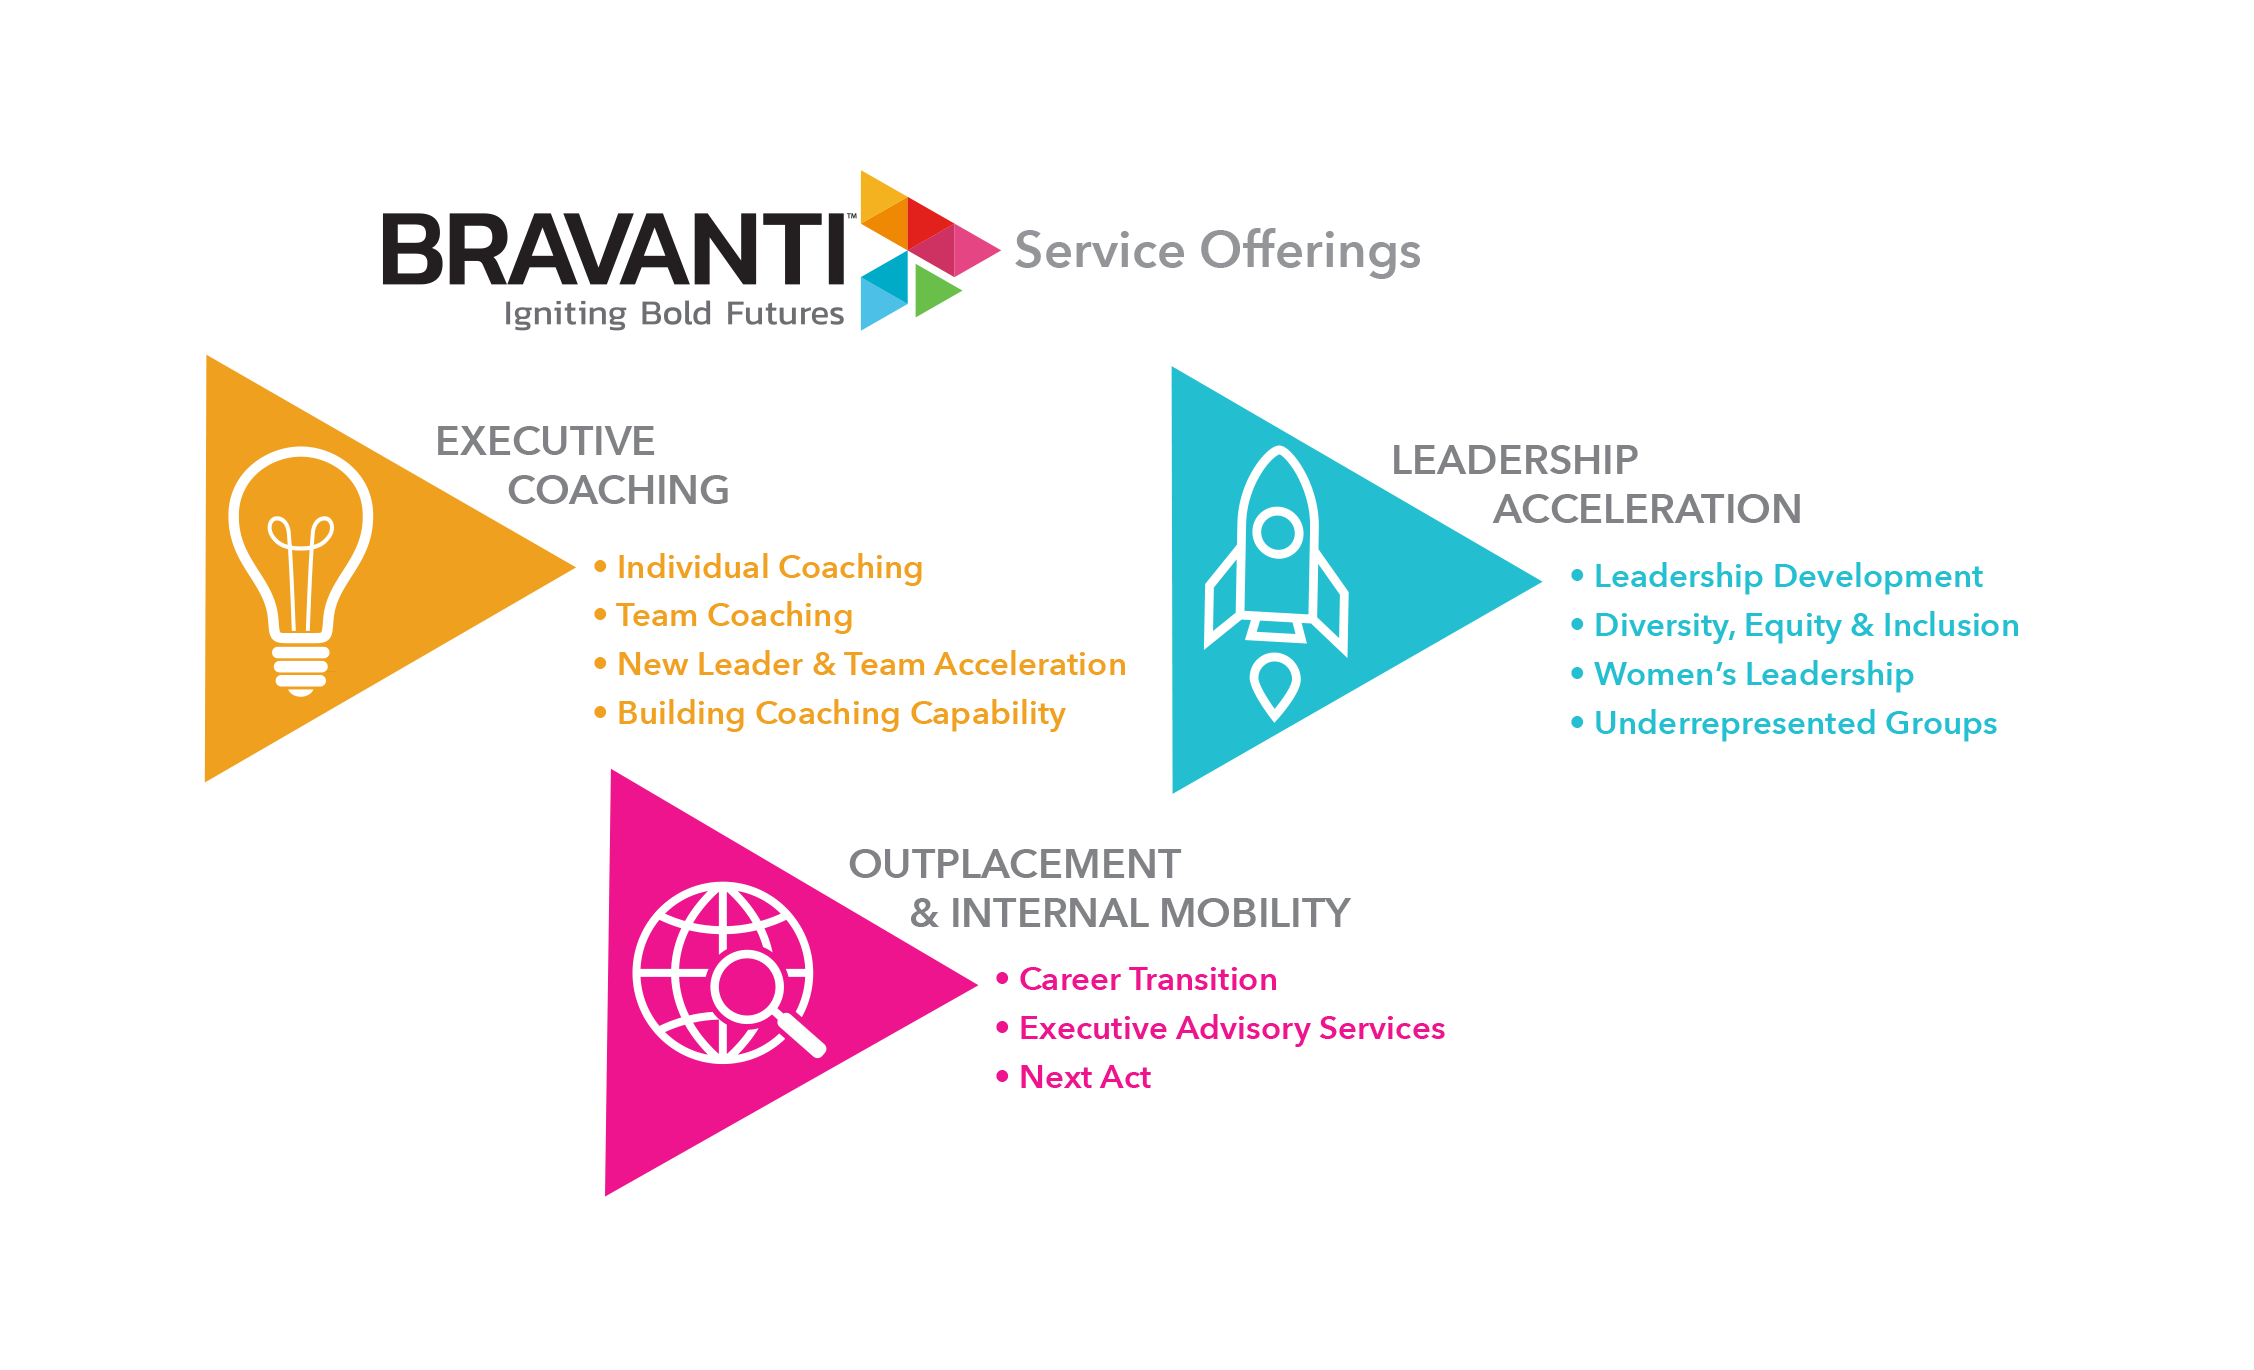 Bravanti offers various programs in the talent development space including executive coaching, leadership acceleration, and outplacement/career transition